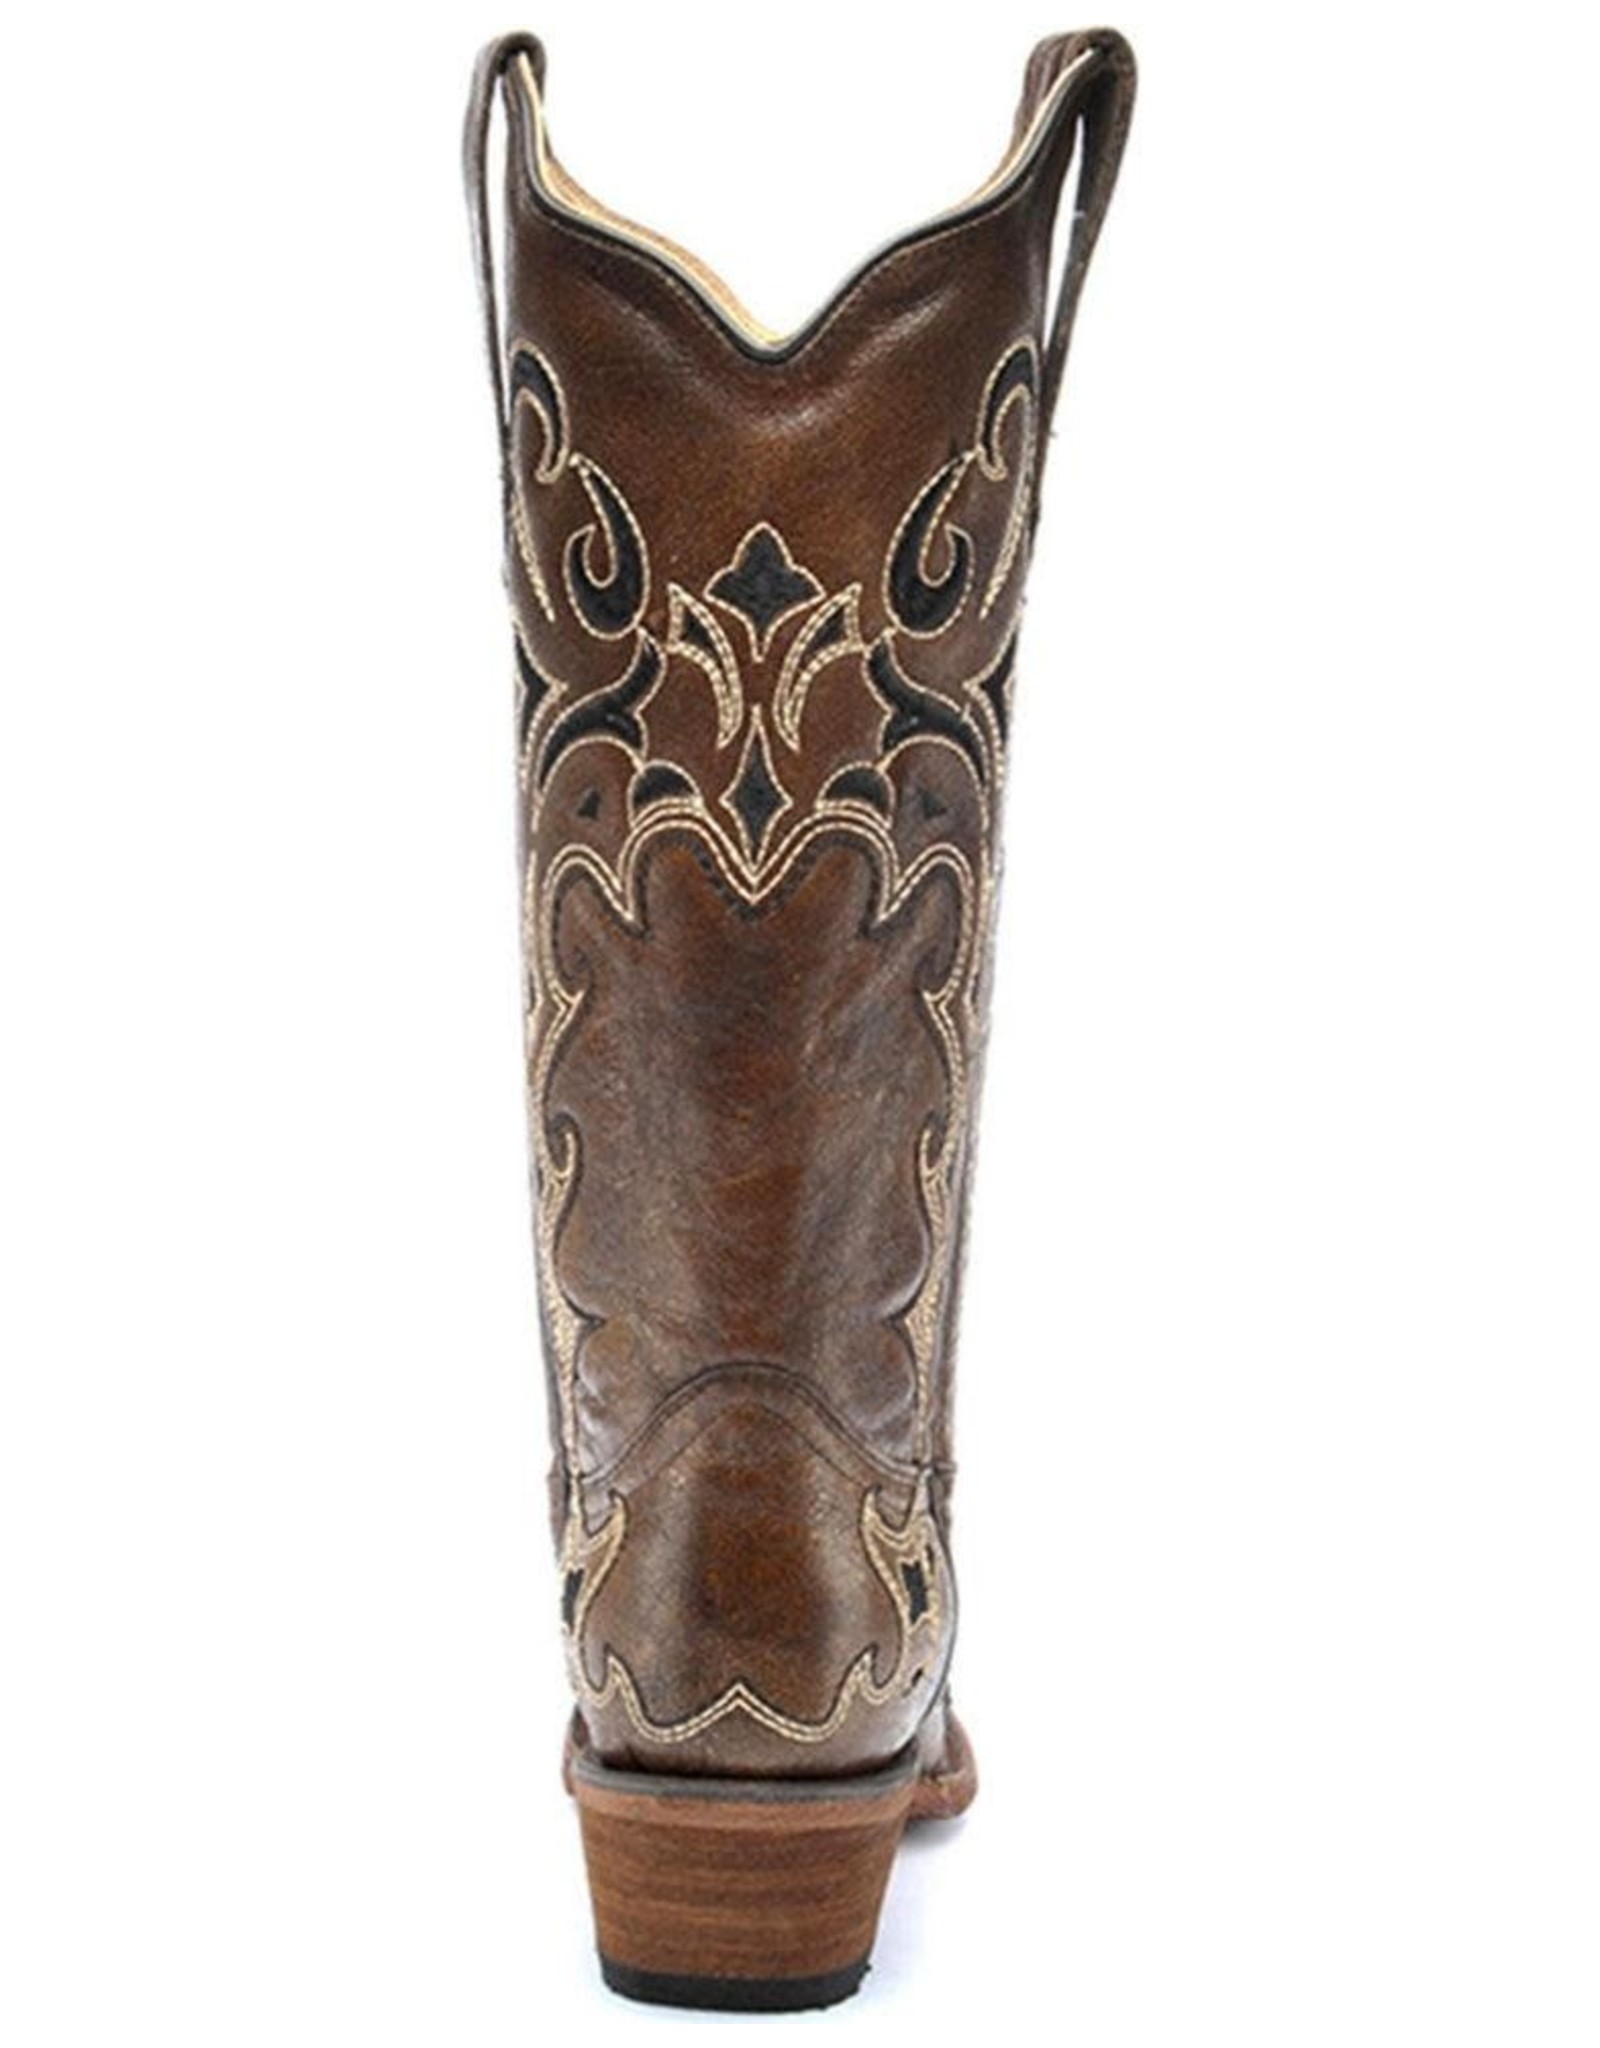 Circle G Ladies Brown Distressed Side Embroidery L5247 Western Boots